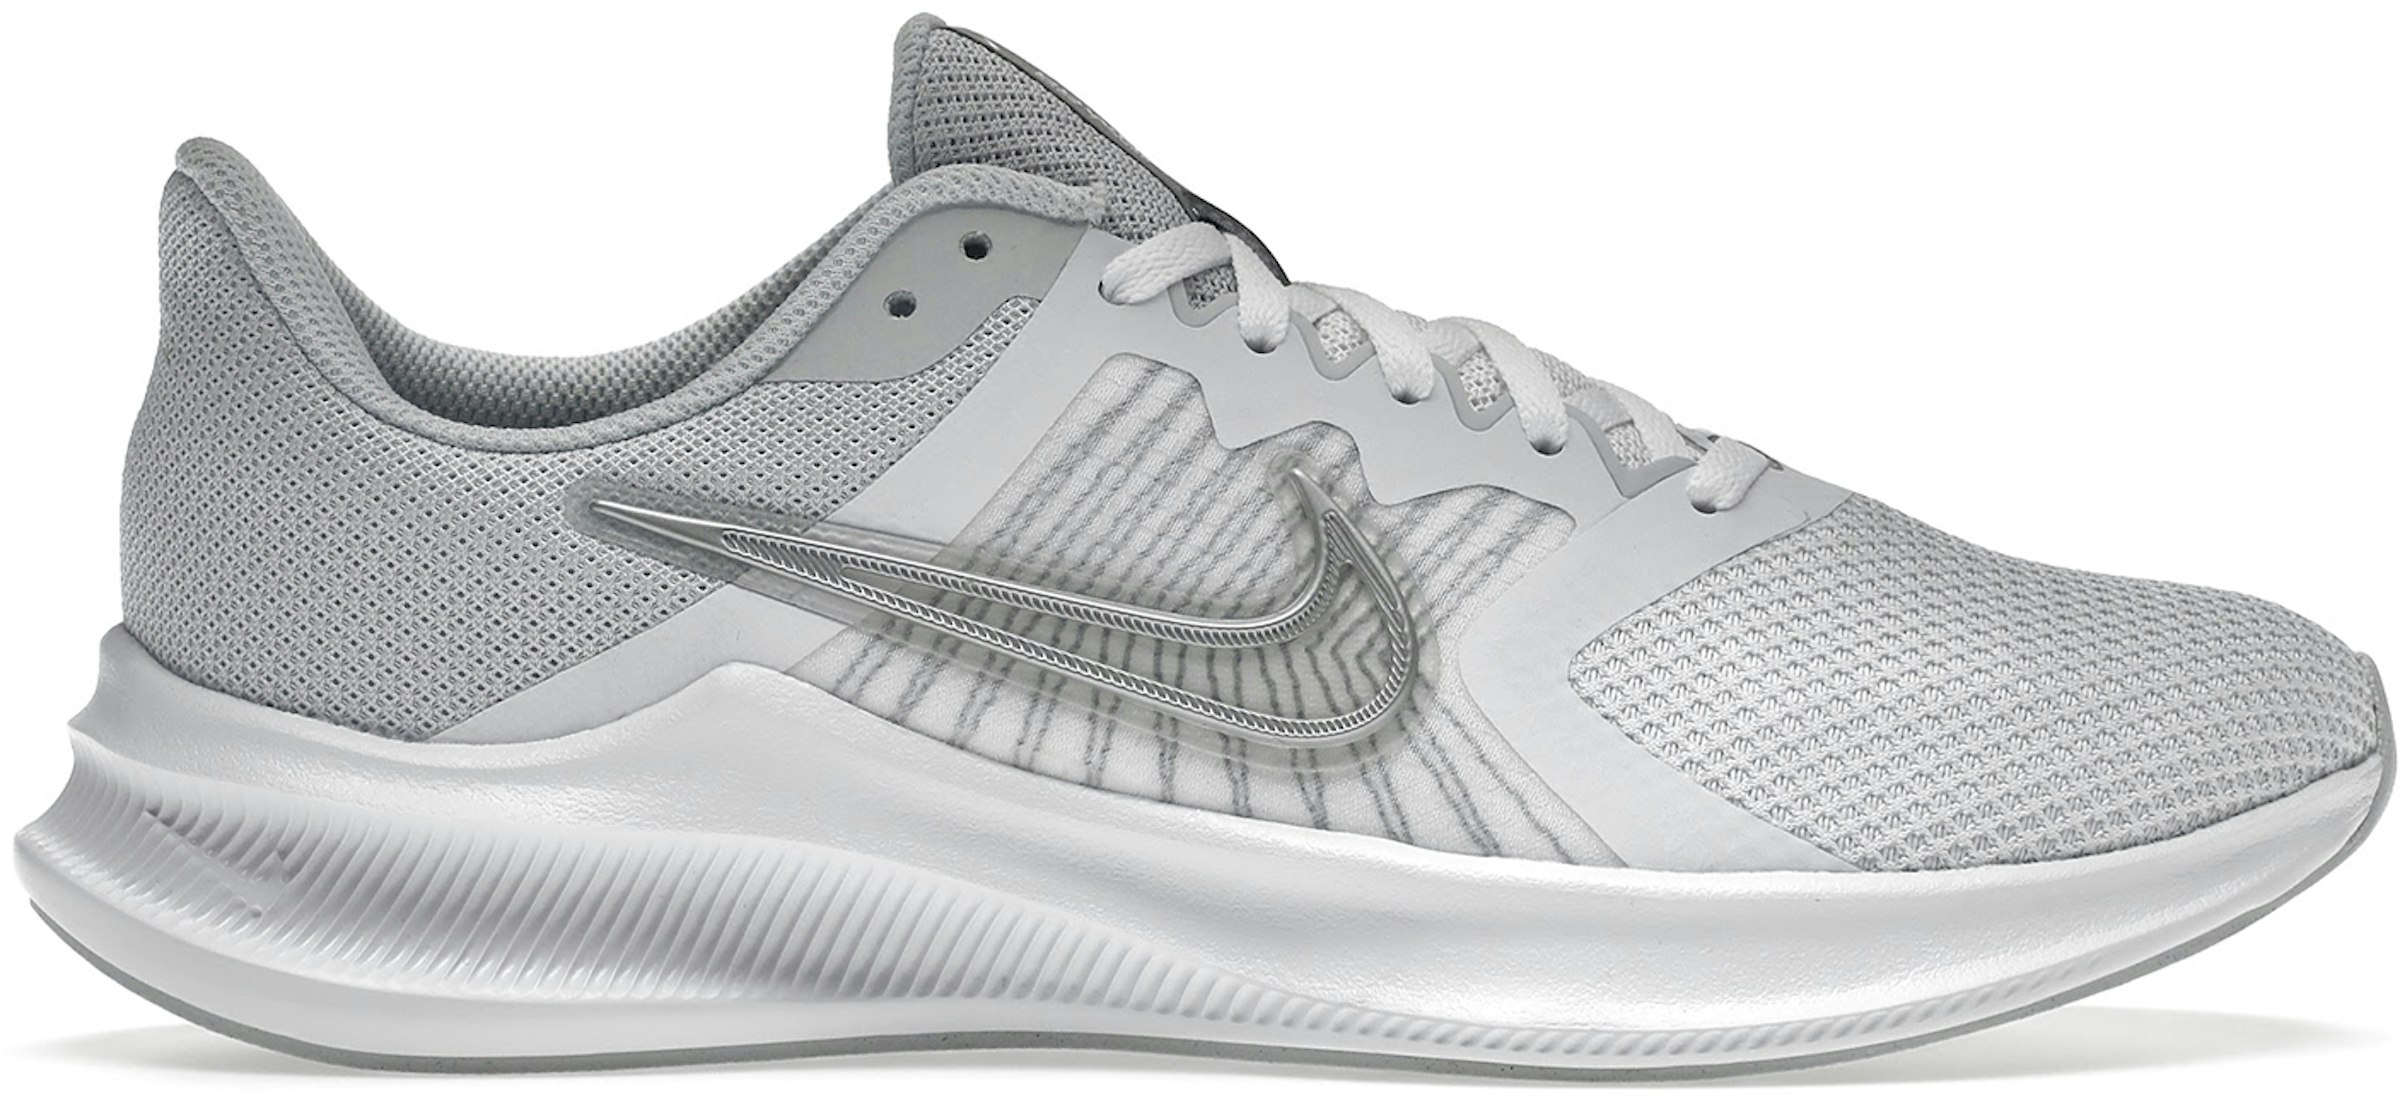 Una vez más Aumentar Implacable Nike Downshifter 11 White Metallic Silver (Women's) - CW3413-100 - US